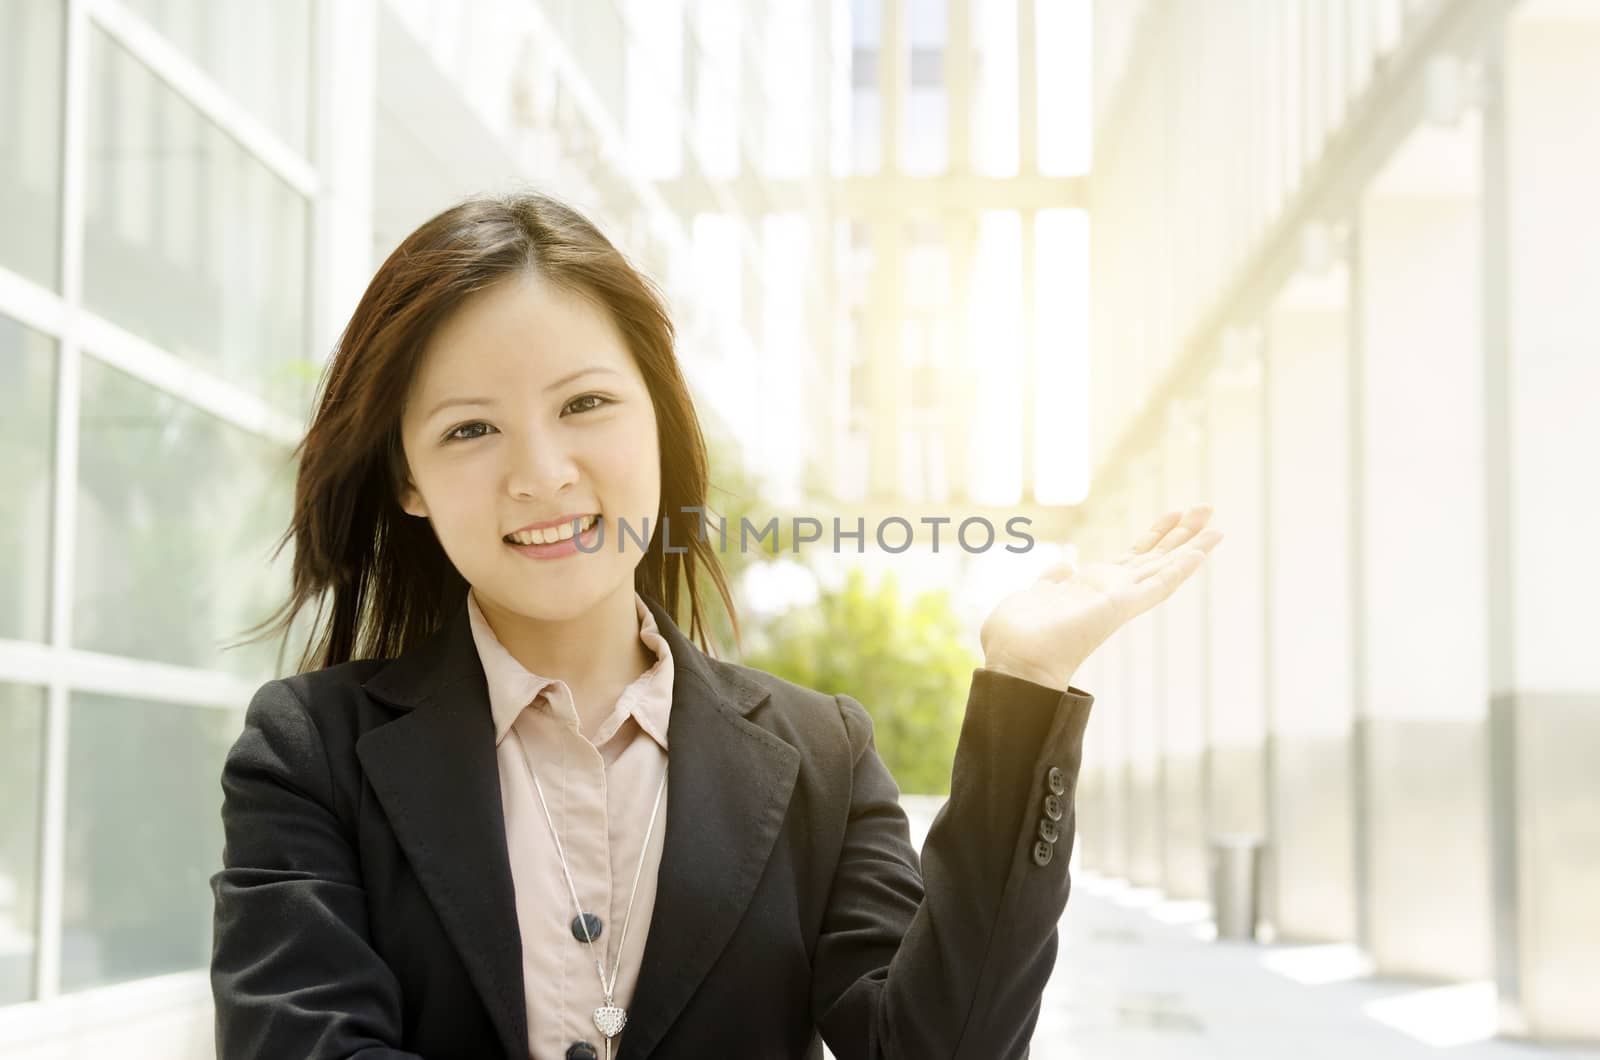 Young Asian business woman hand showing somethings, at an office environment, natural golden sunlight at background.